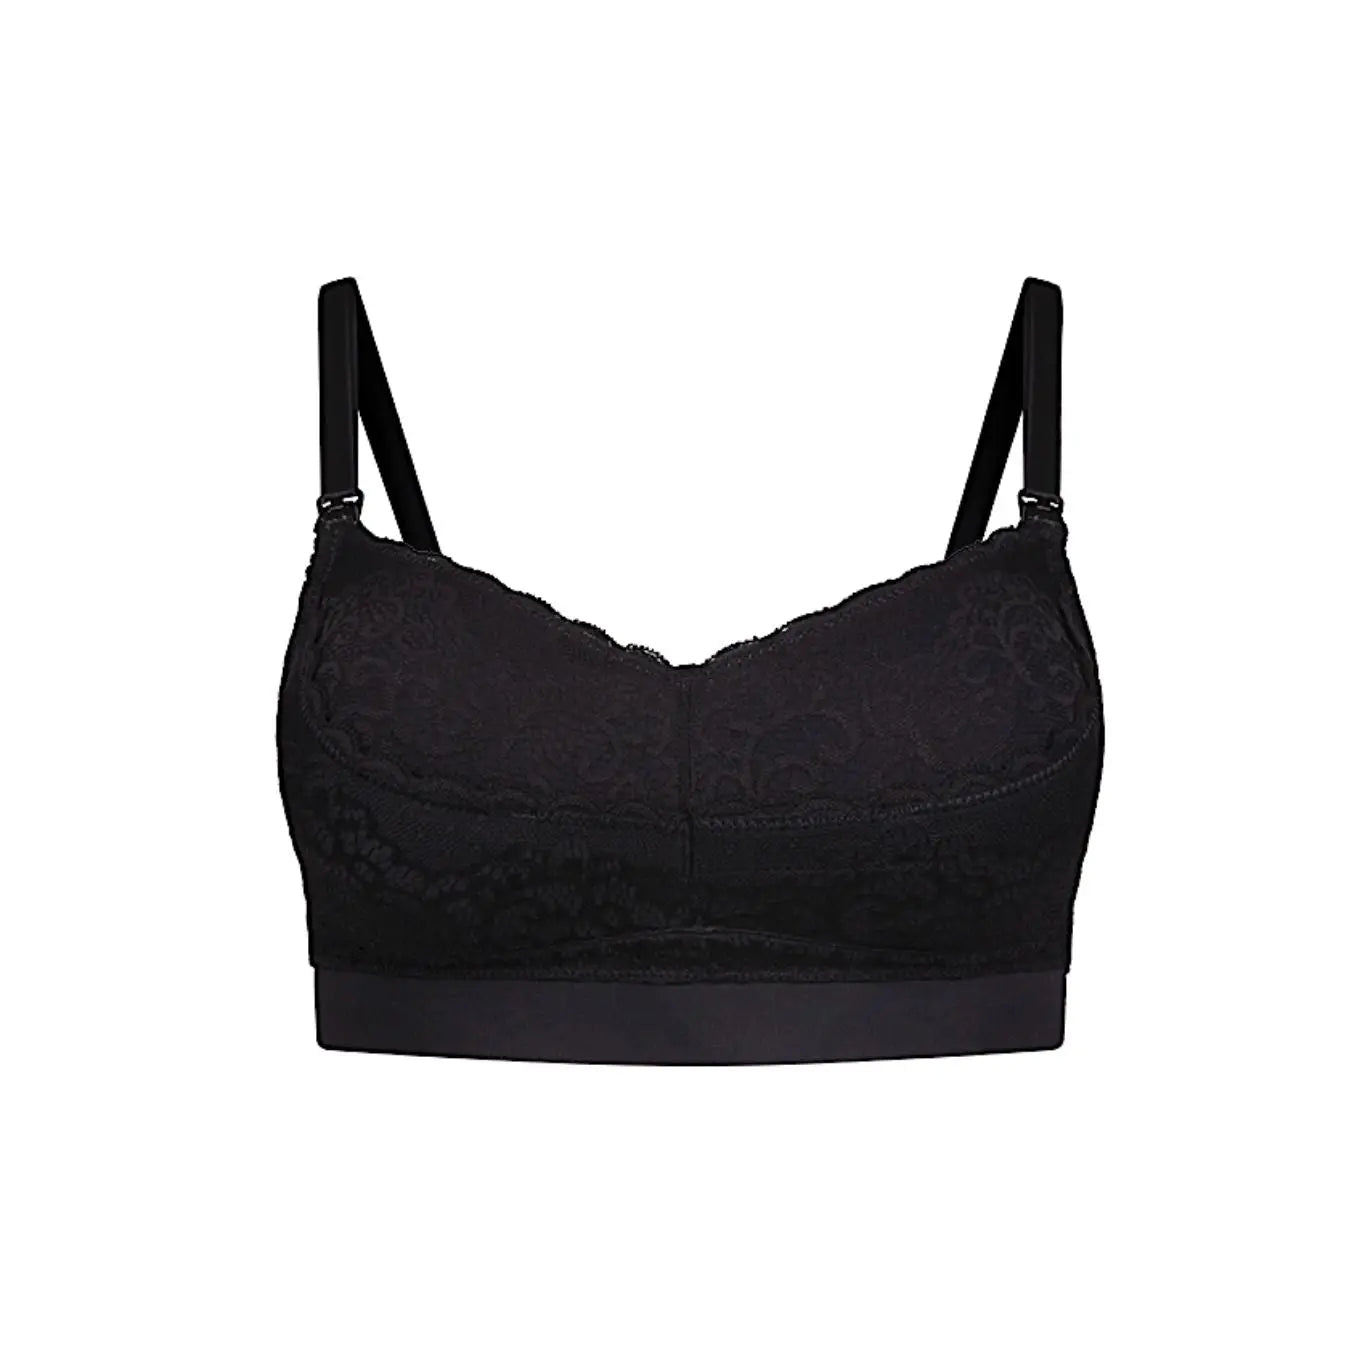 NEW AUDEN 2-in-One Nursing and Hands Free Pumping Bra Black Size Medium -  Helia Beer Co